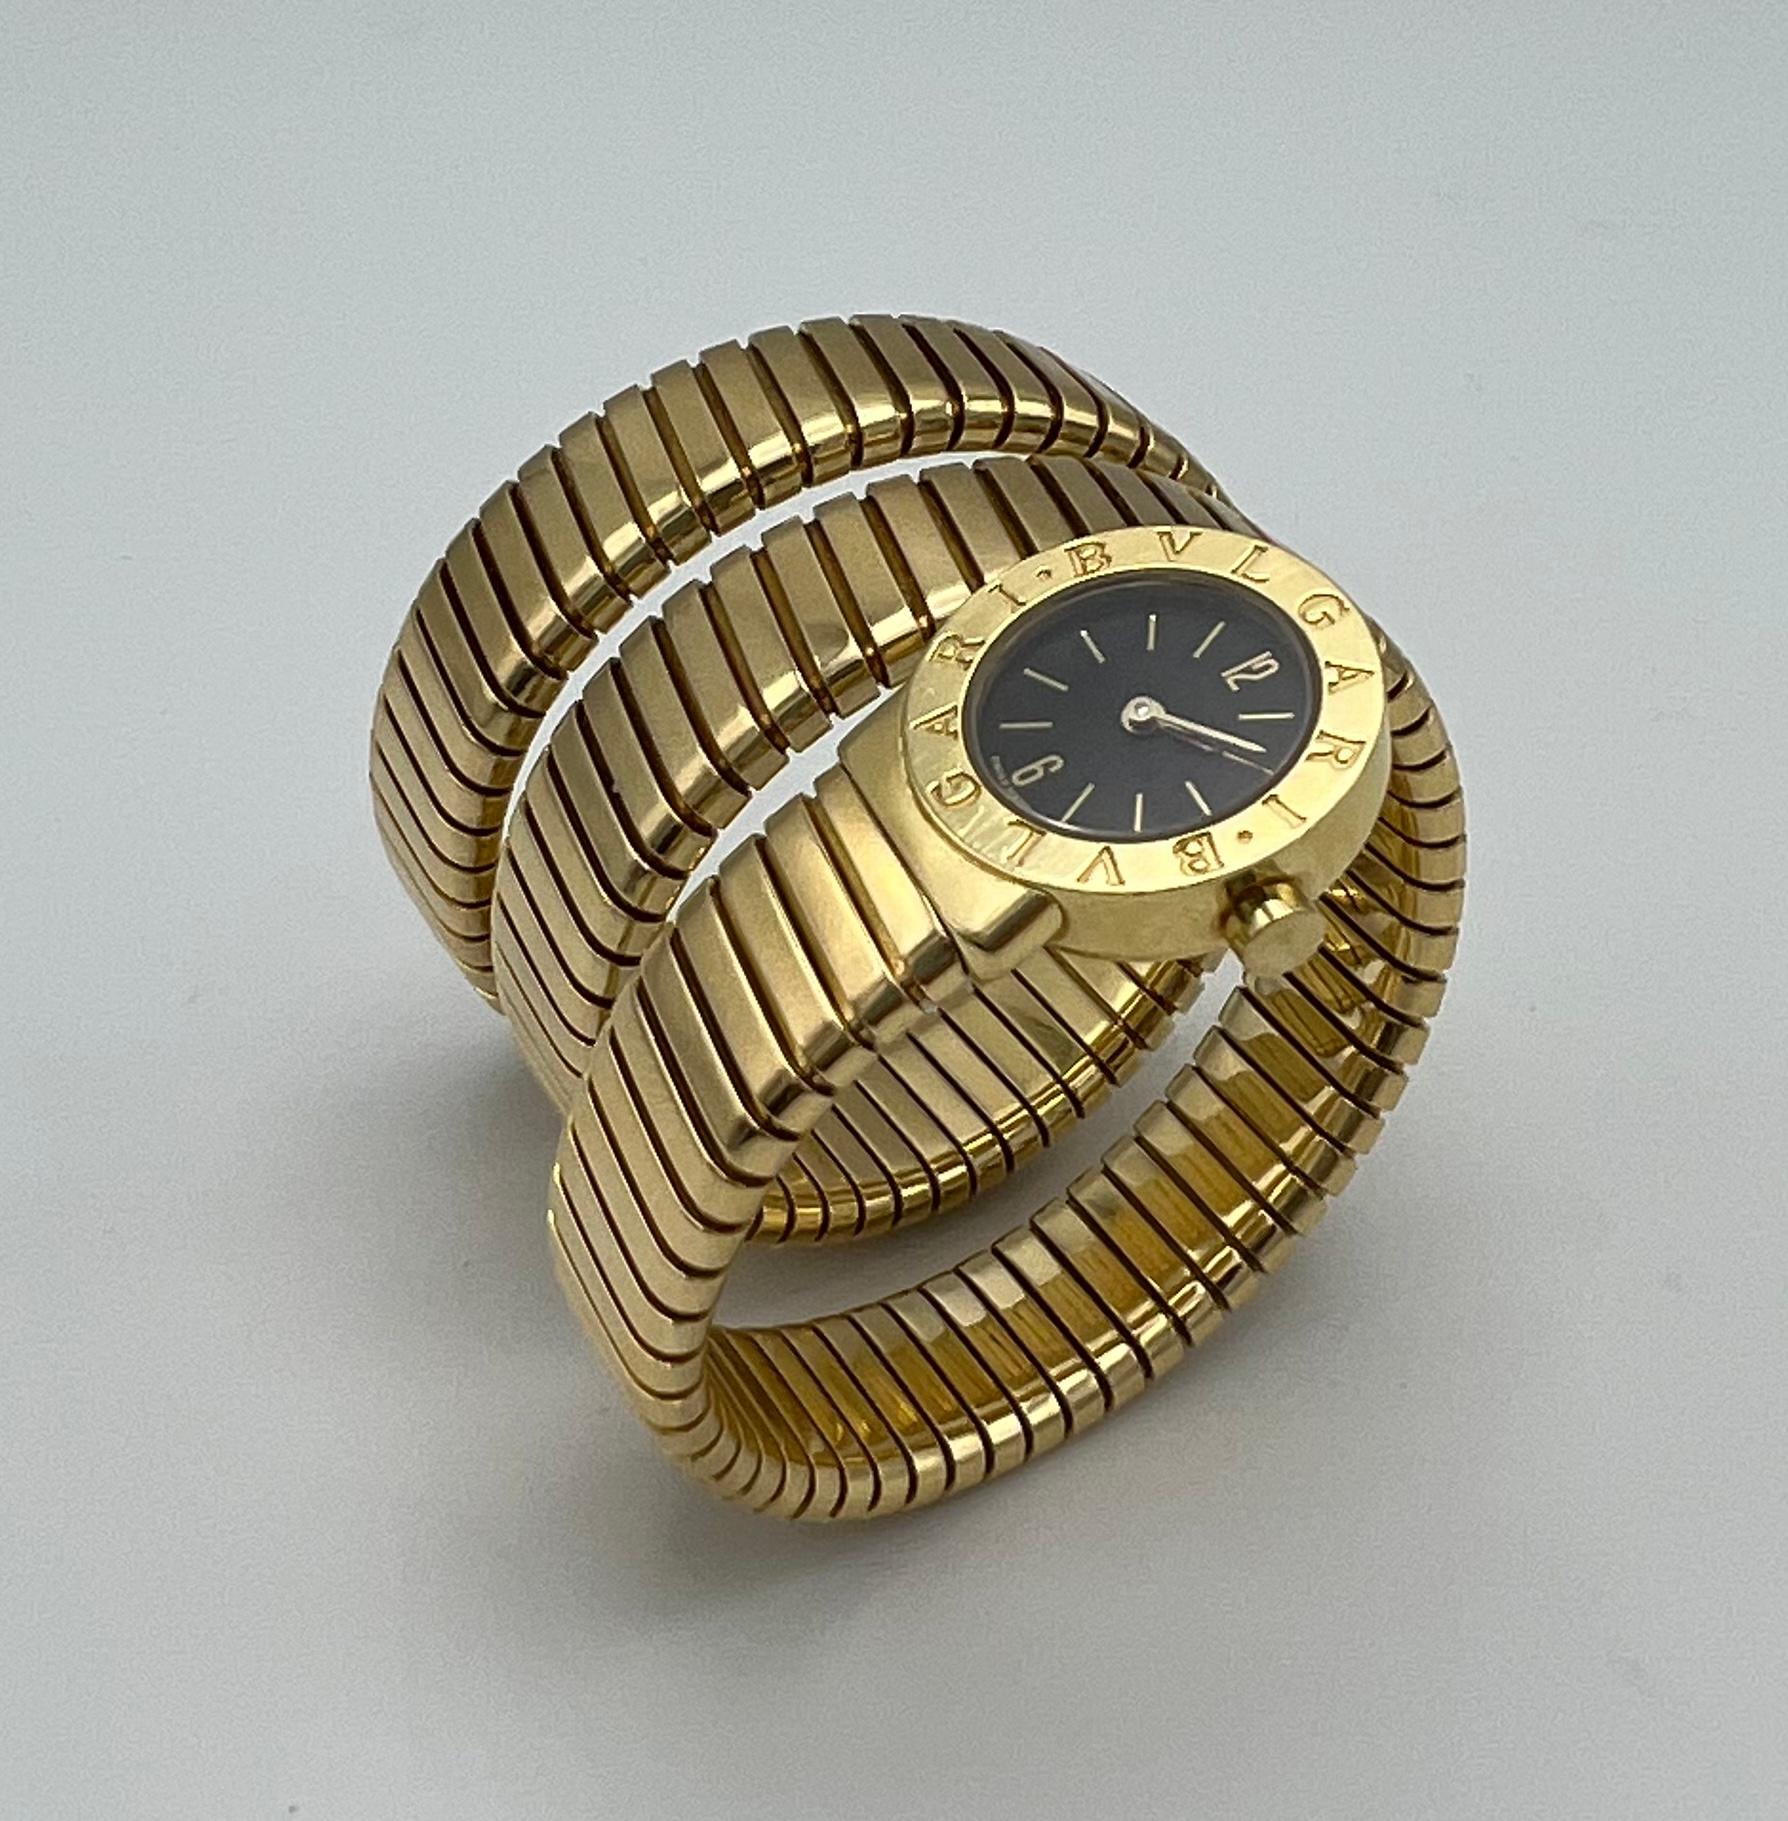 Product details:  

The watch is made out of 18K yellow gold. It features quartz movement, 19mm case diameter, engraved bezel and wrap around design. The watch comes with the original fitted box. The watch fits smaller wrist.   
Hallmarks: BVLGARI